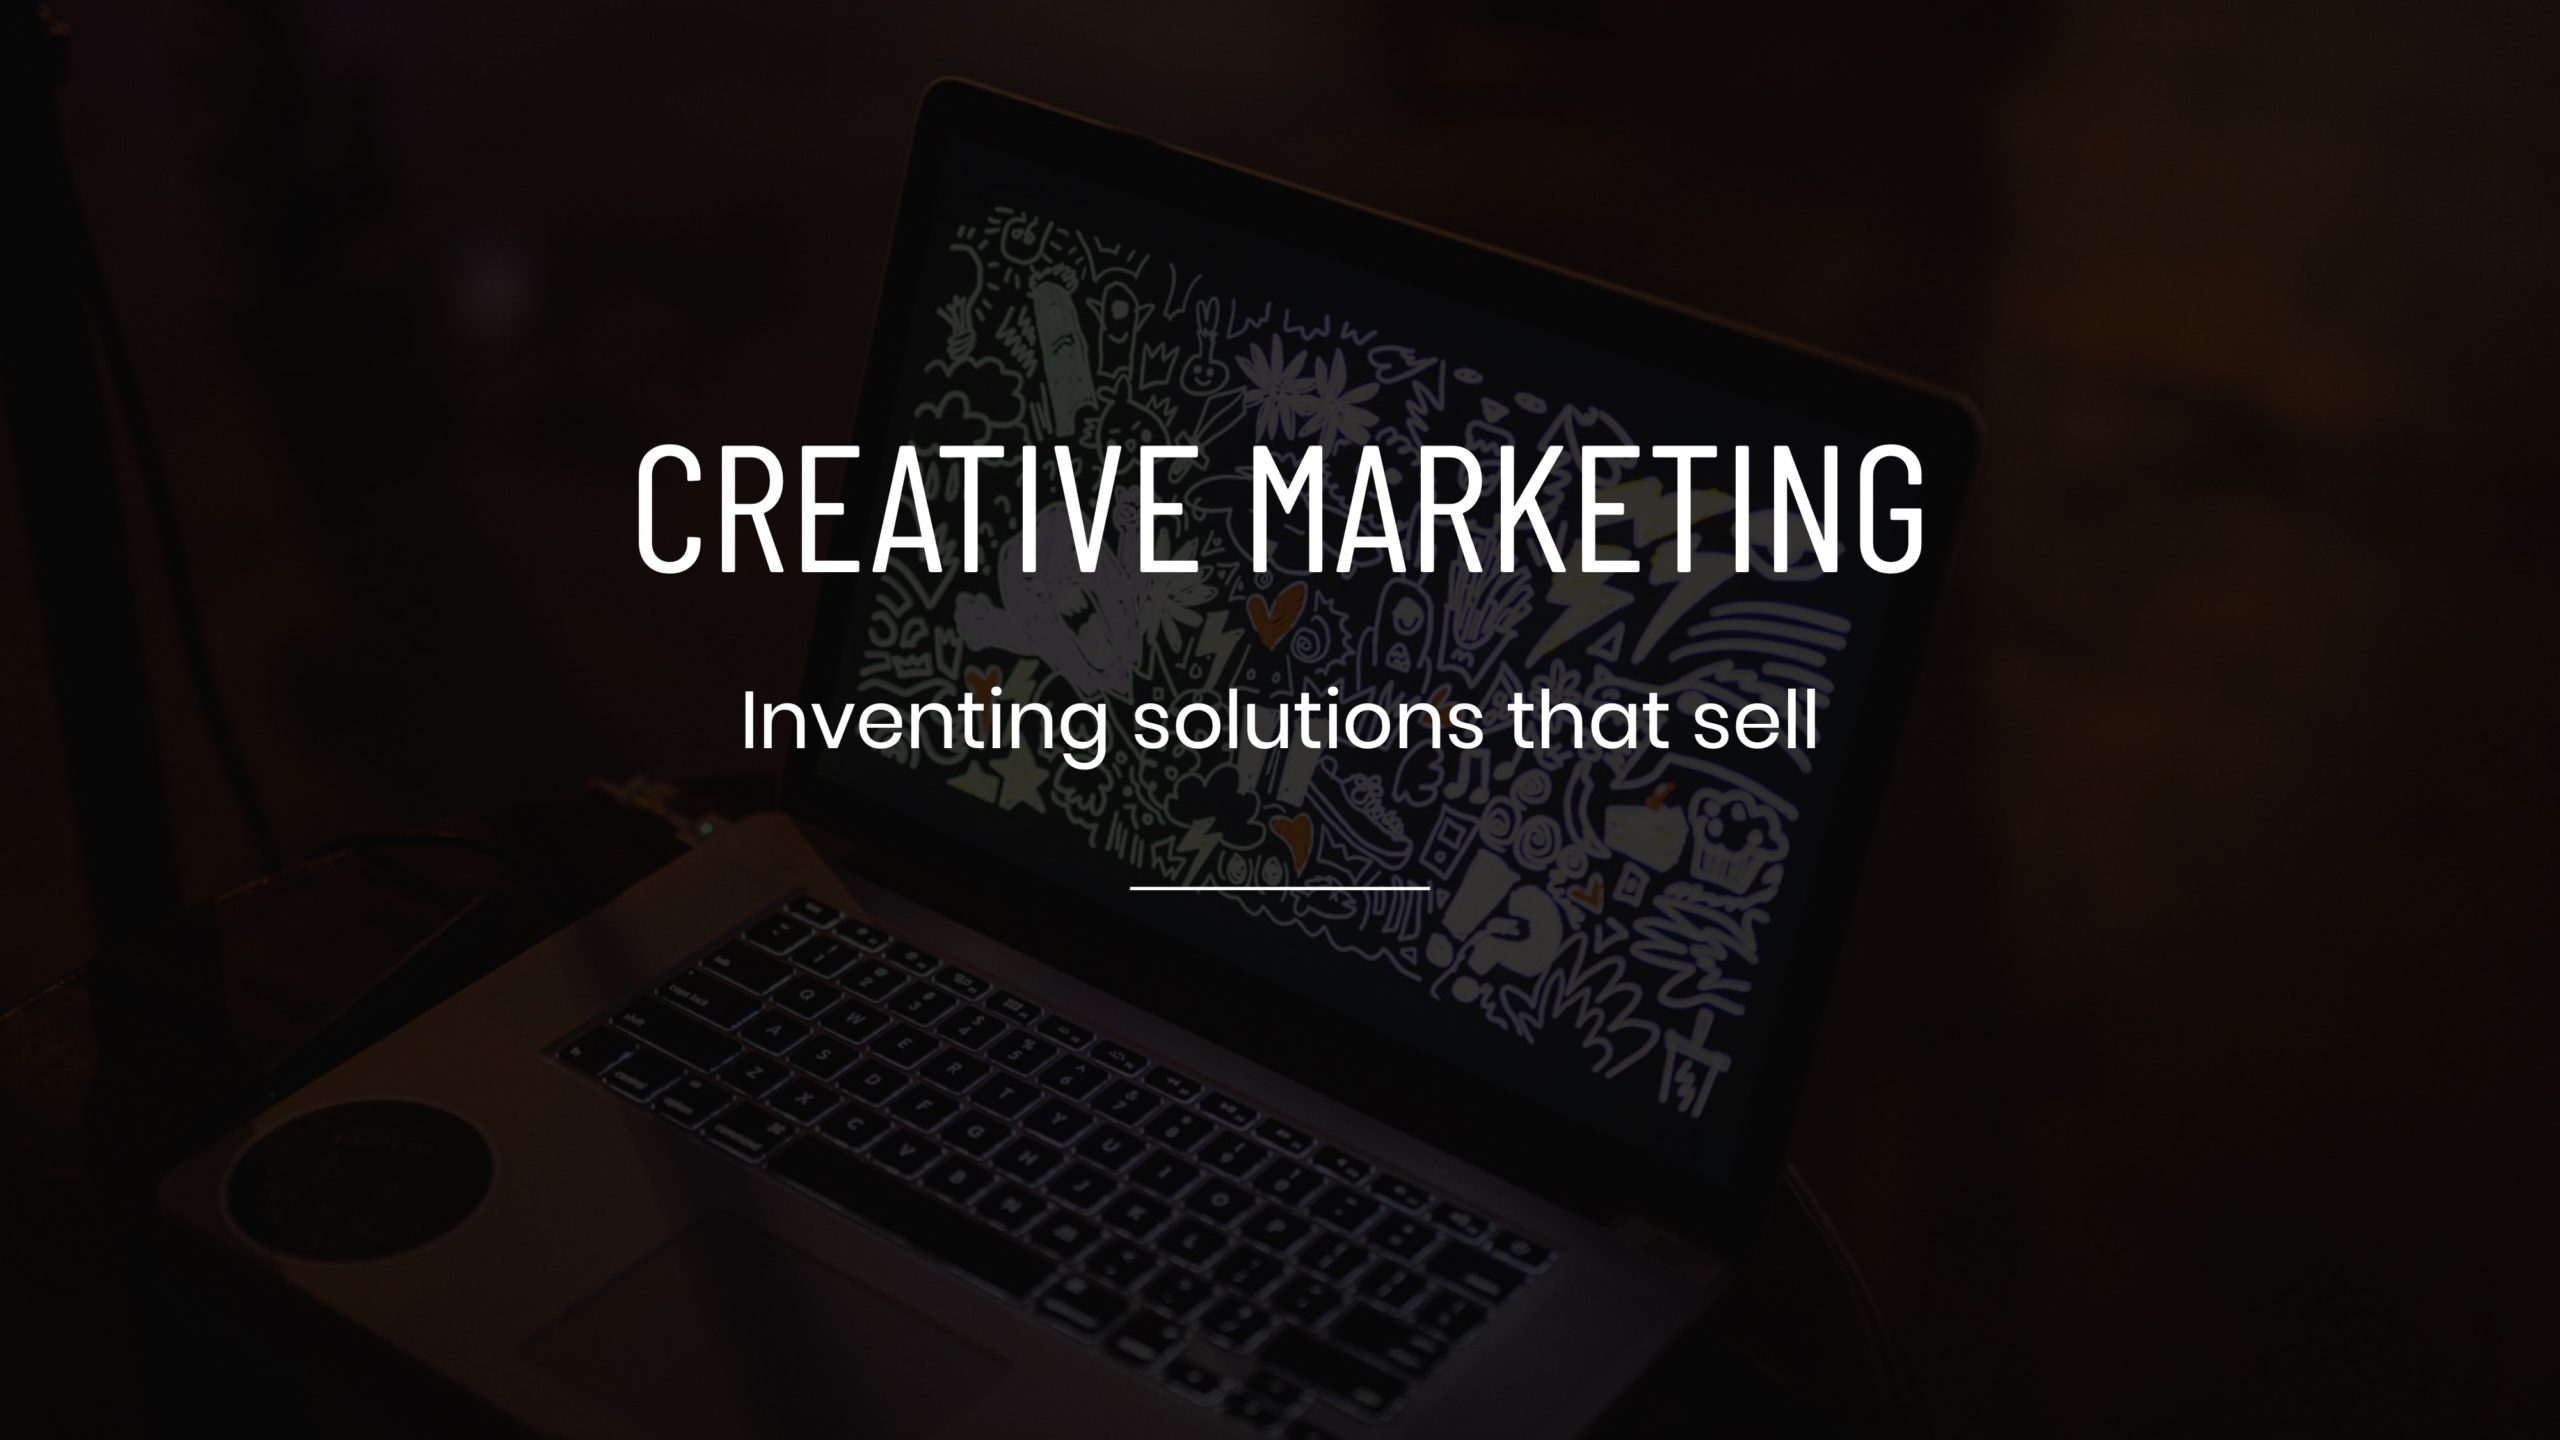 White Creative Marketing Inventing Solutions that Sell title Service Tile on dimmed background of laptop with graphics on screen